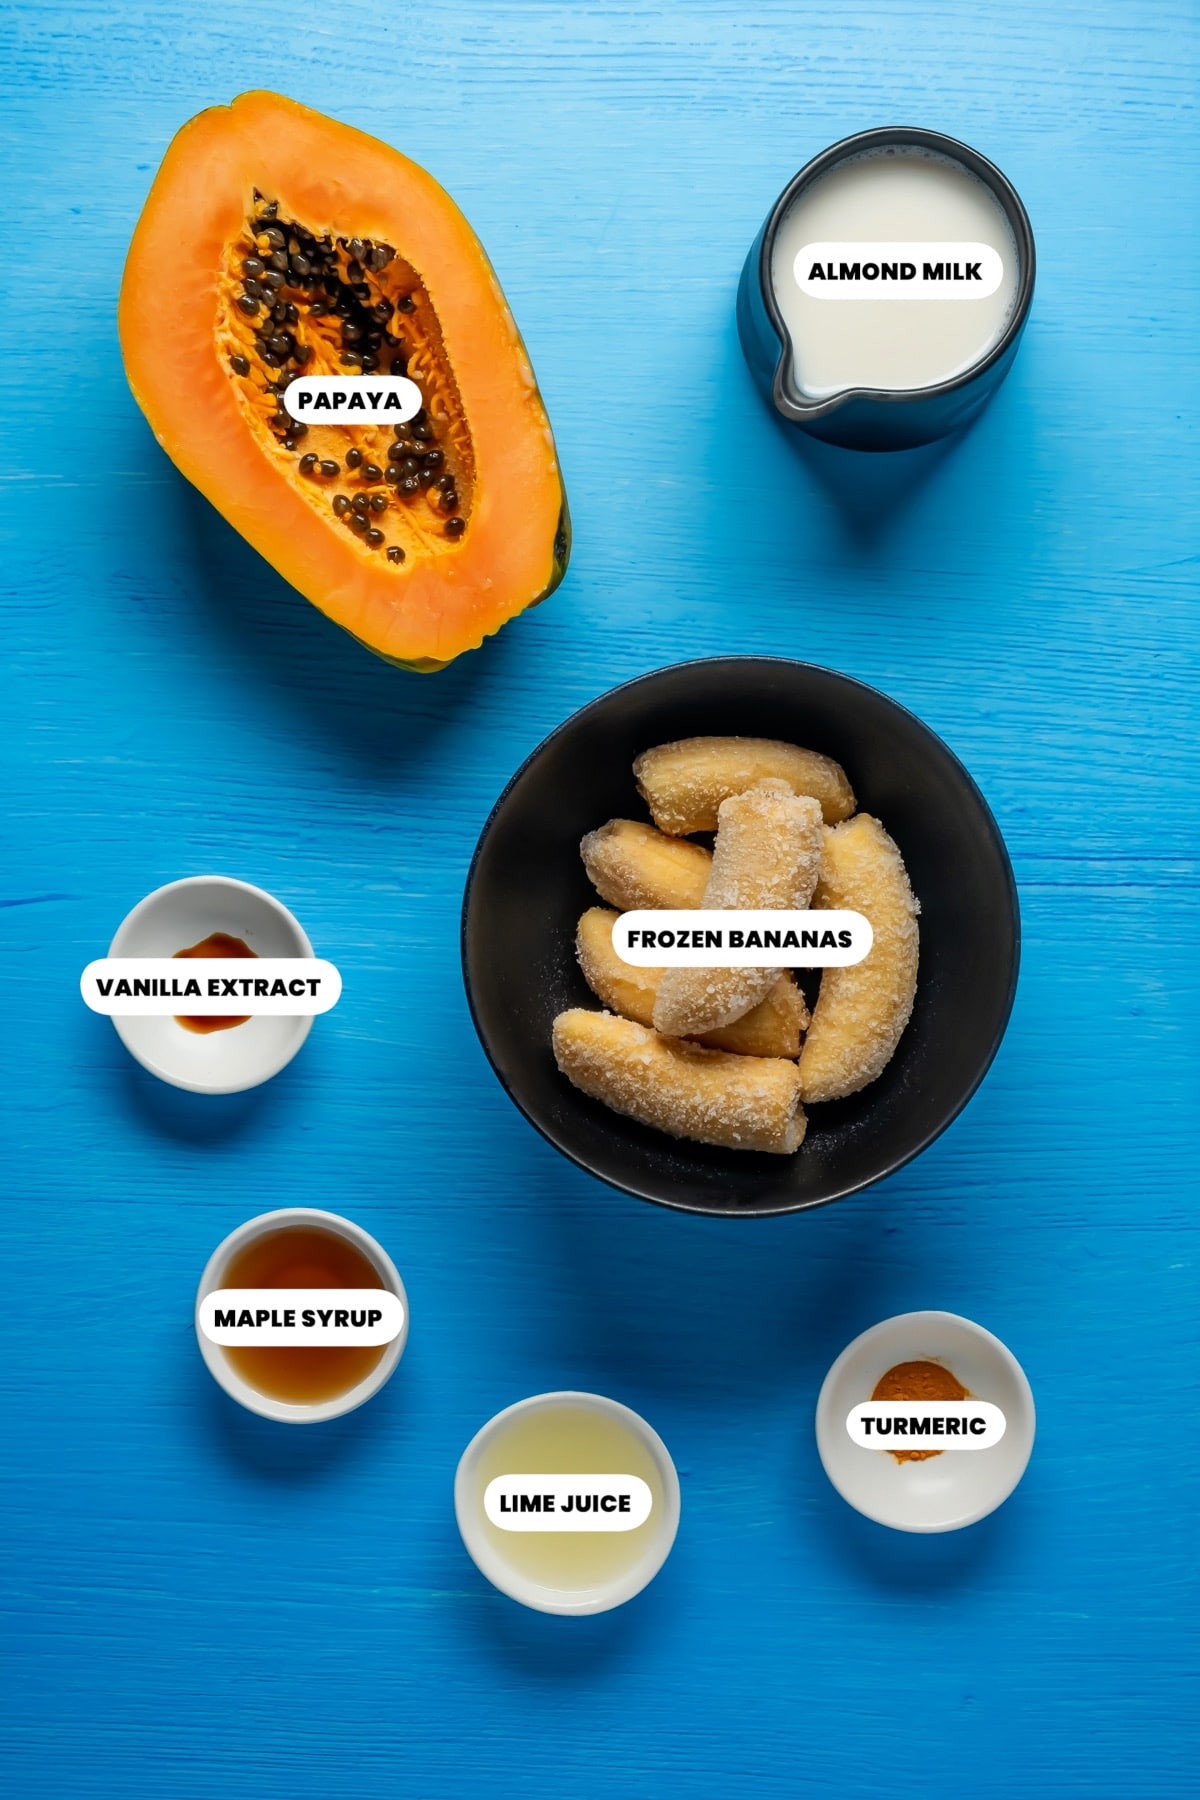 Photo of the ingredients needed to make papaya smoothies.